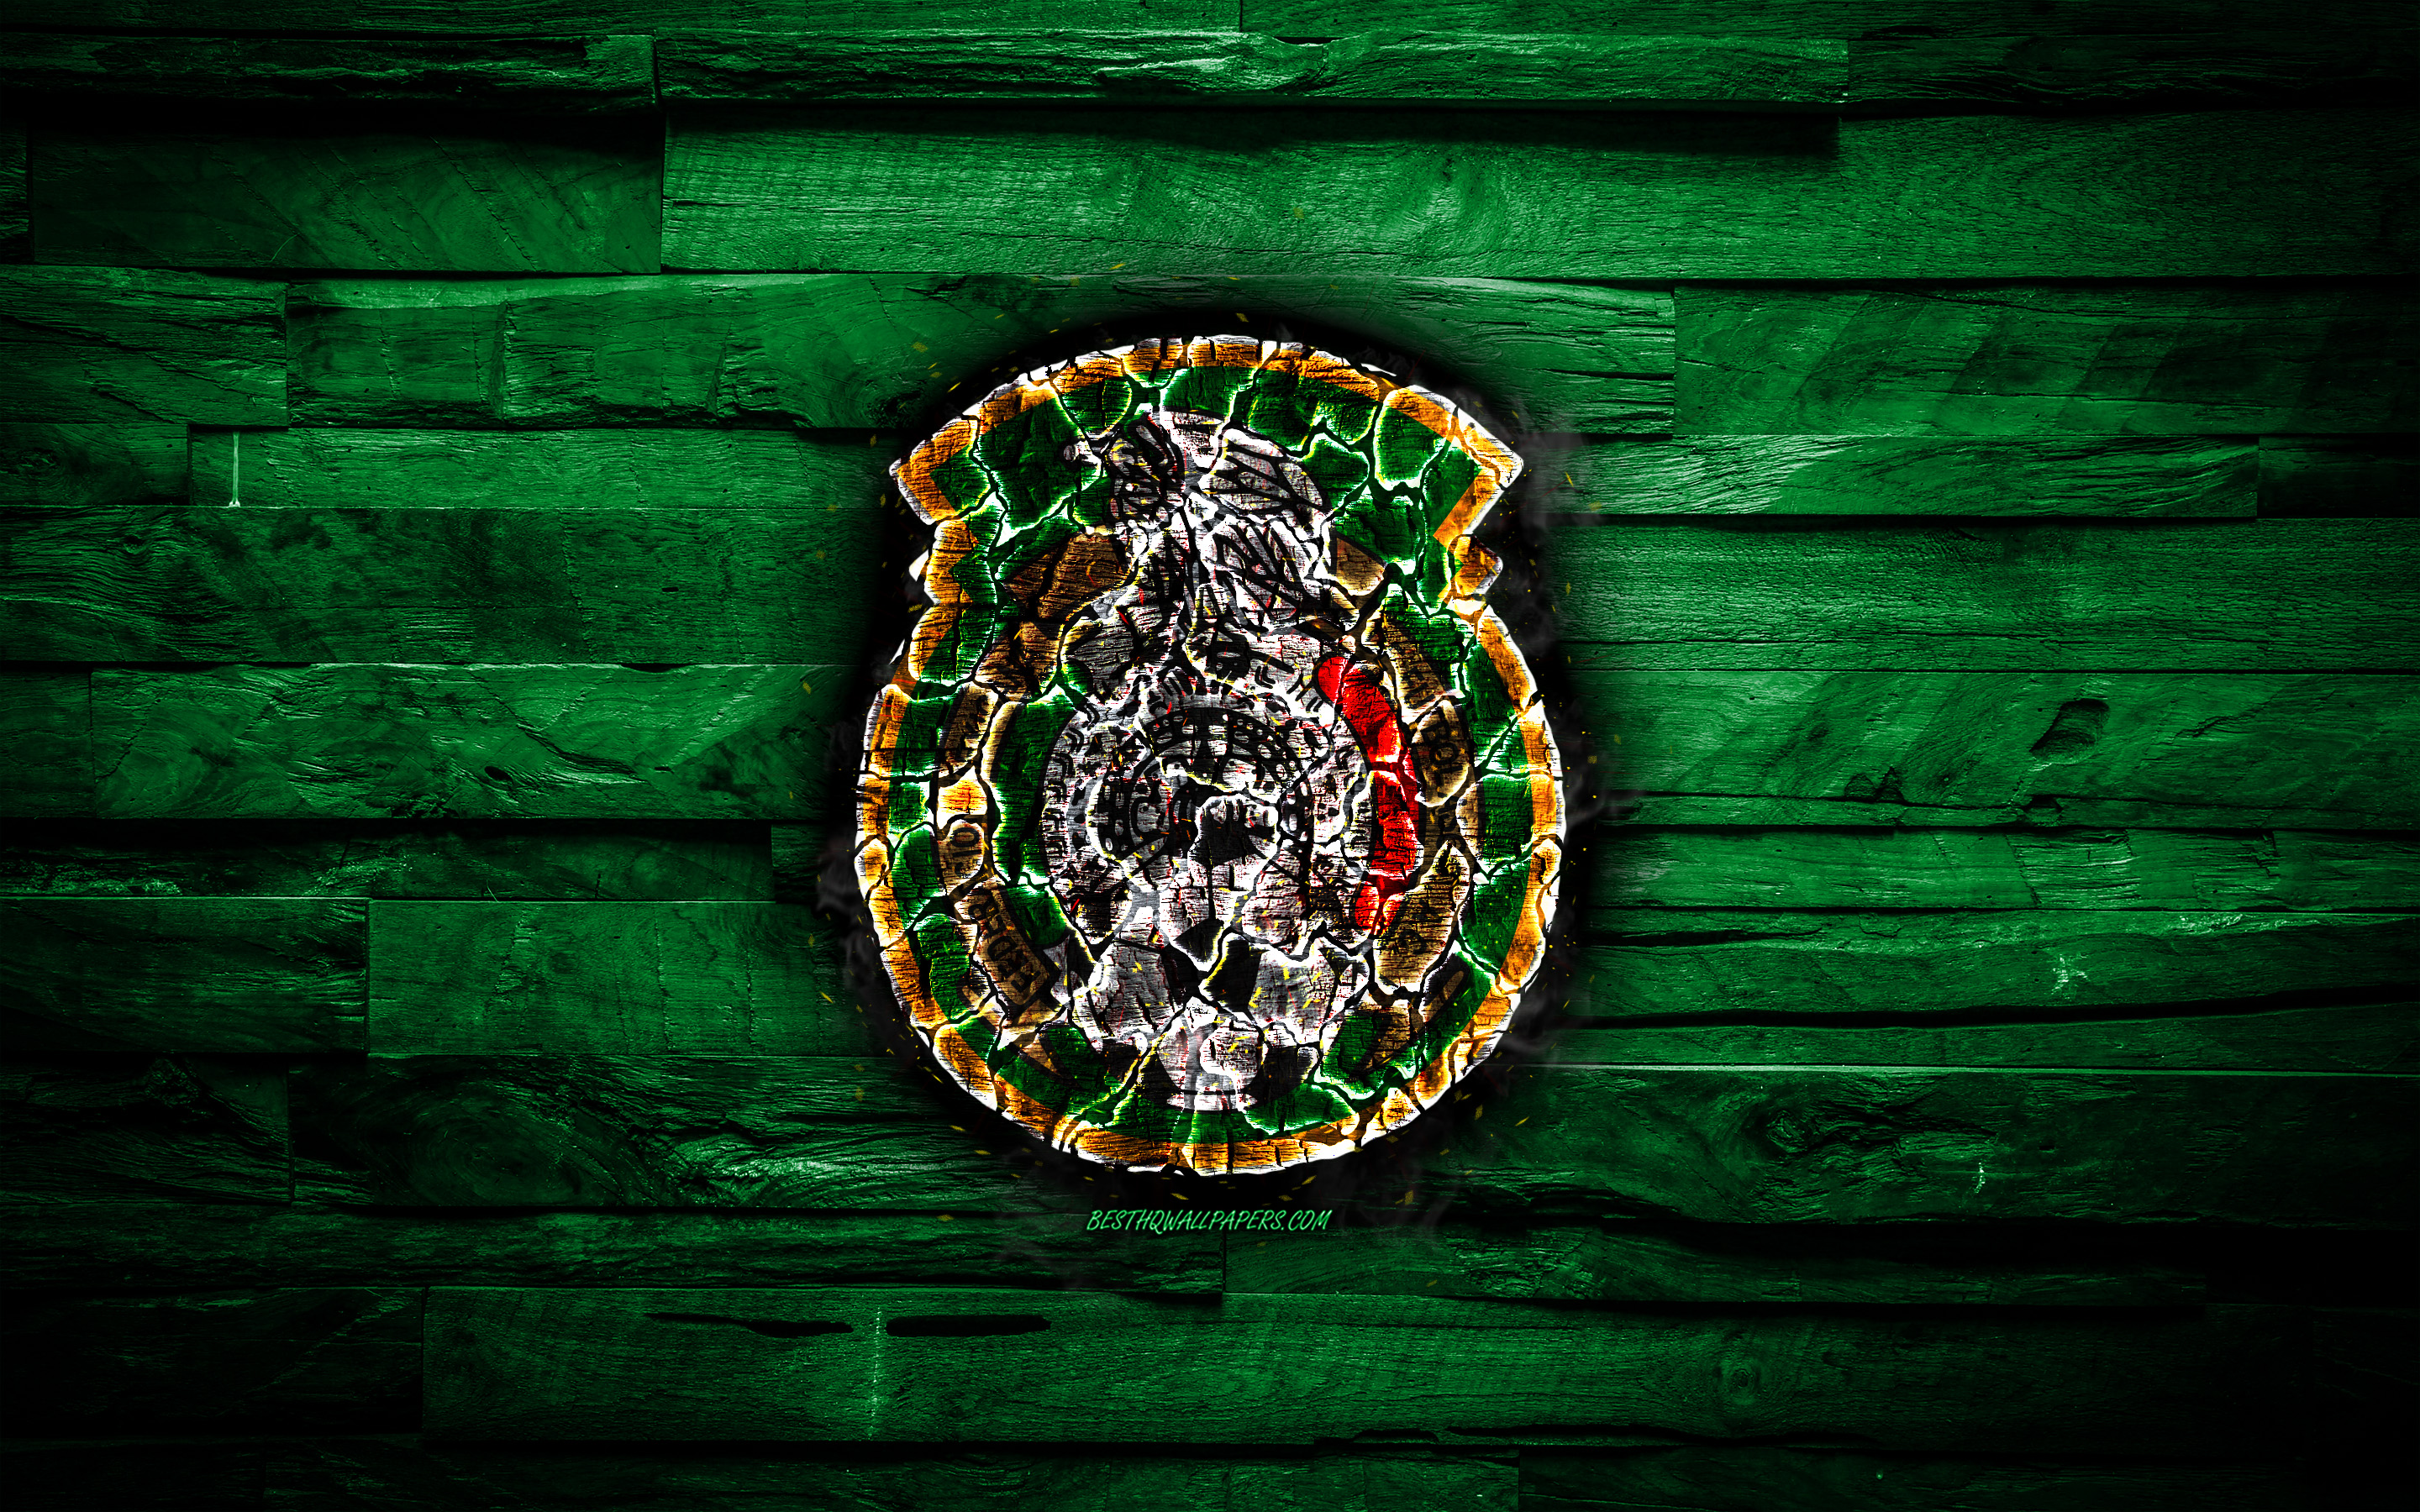 Download wallpaper Mexico, burning logo, CONCACAF, green wooden background, grunge, North America National Teams, football, Mexican soccer team, soccer, Mexico national football team for desktop with resolution 2880x1800. High Quality HD picture